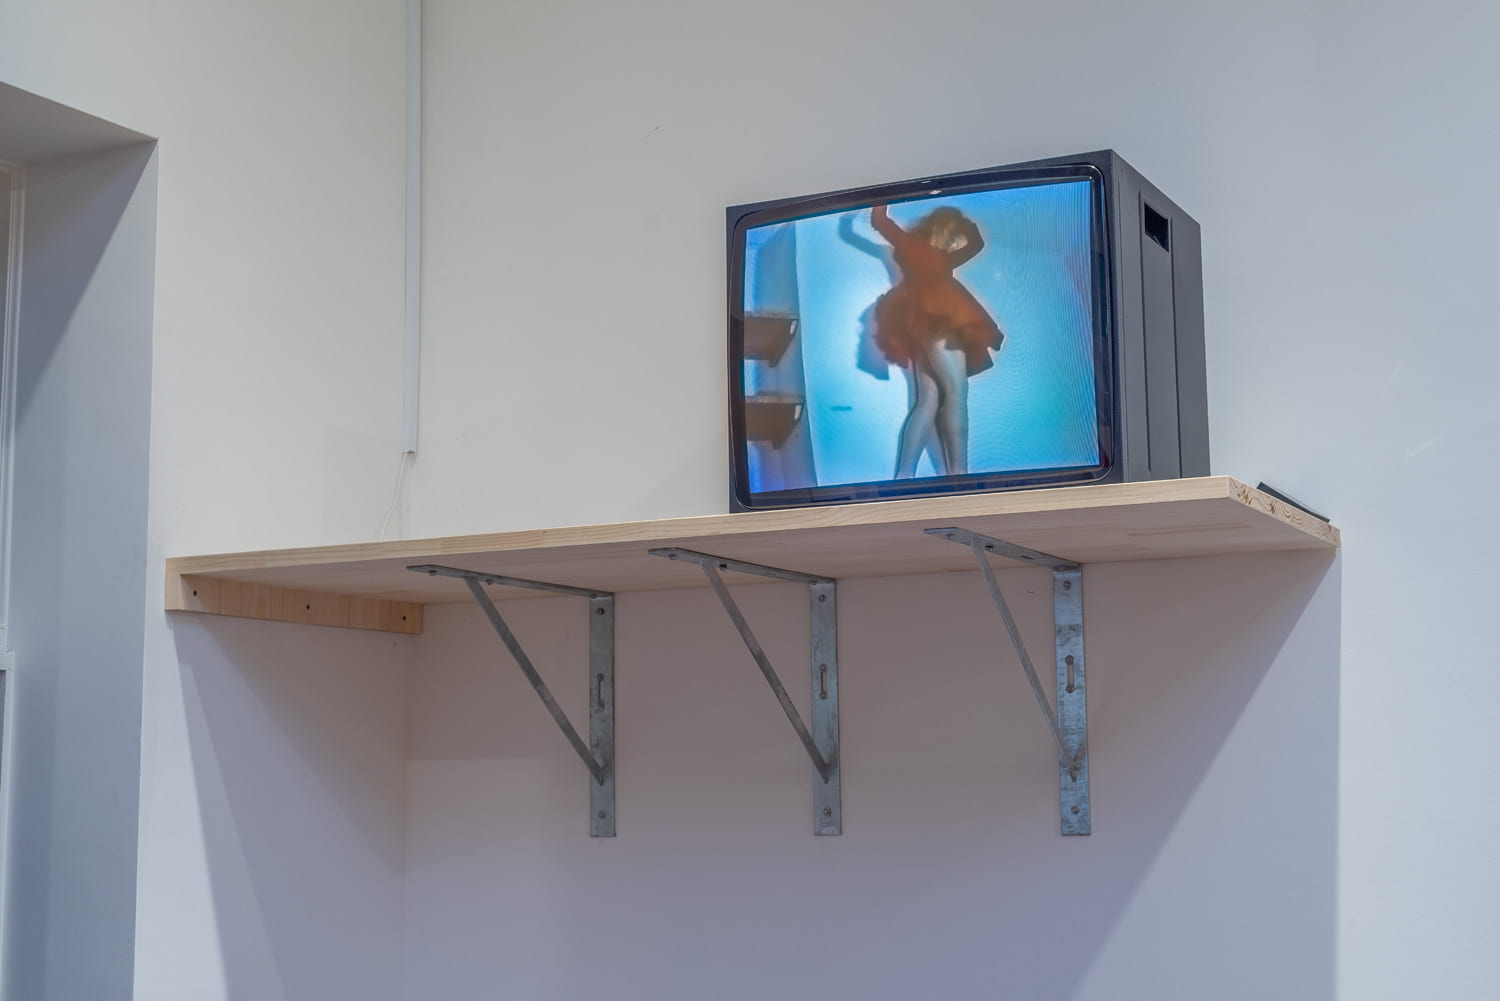 A wooden shelf with a large CRT television set on top of it. On the TV, a film plays showing a woman in a red dress climbing around a small apartment.